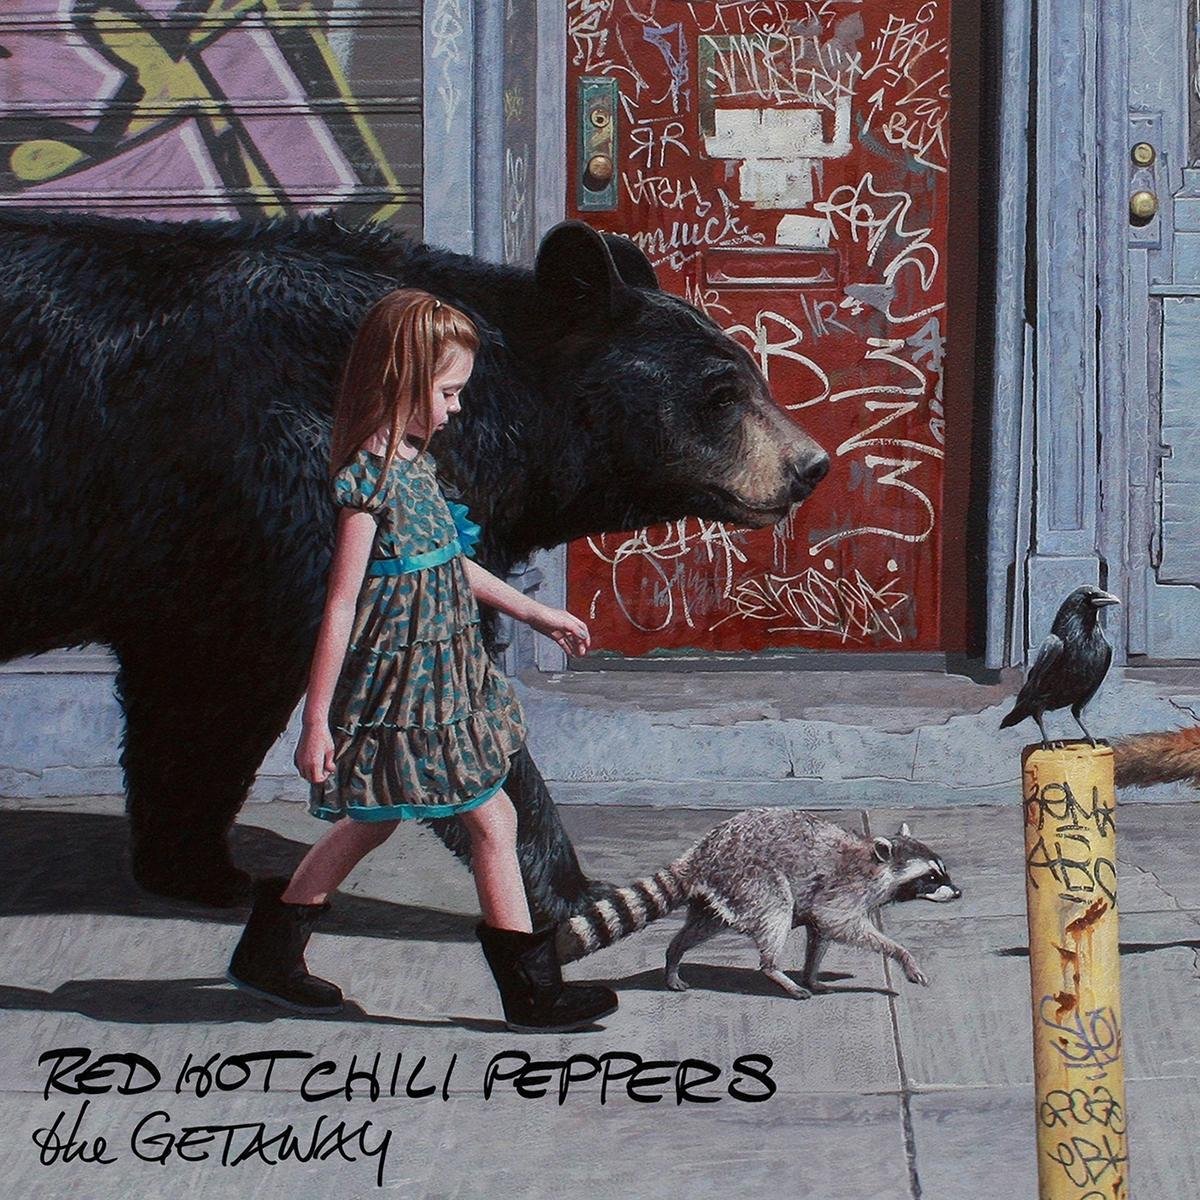 The Getaway (LP) - Red Hot Chili Peppers